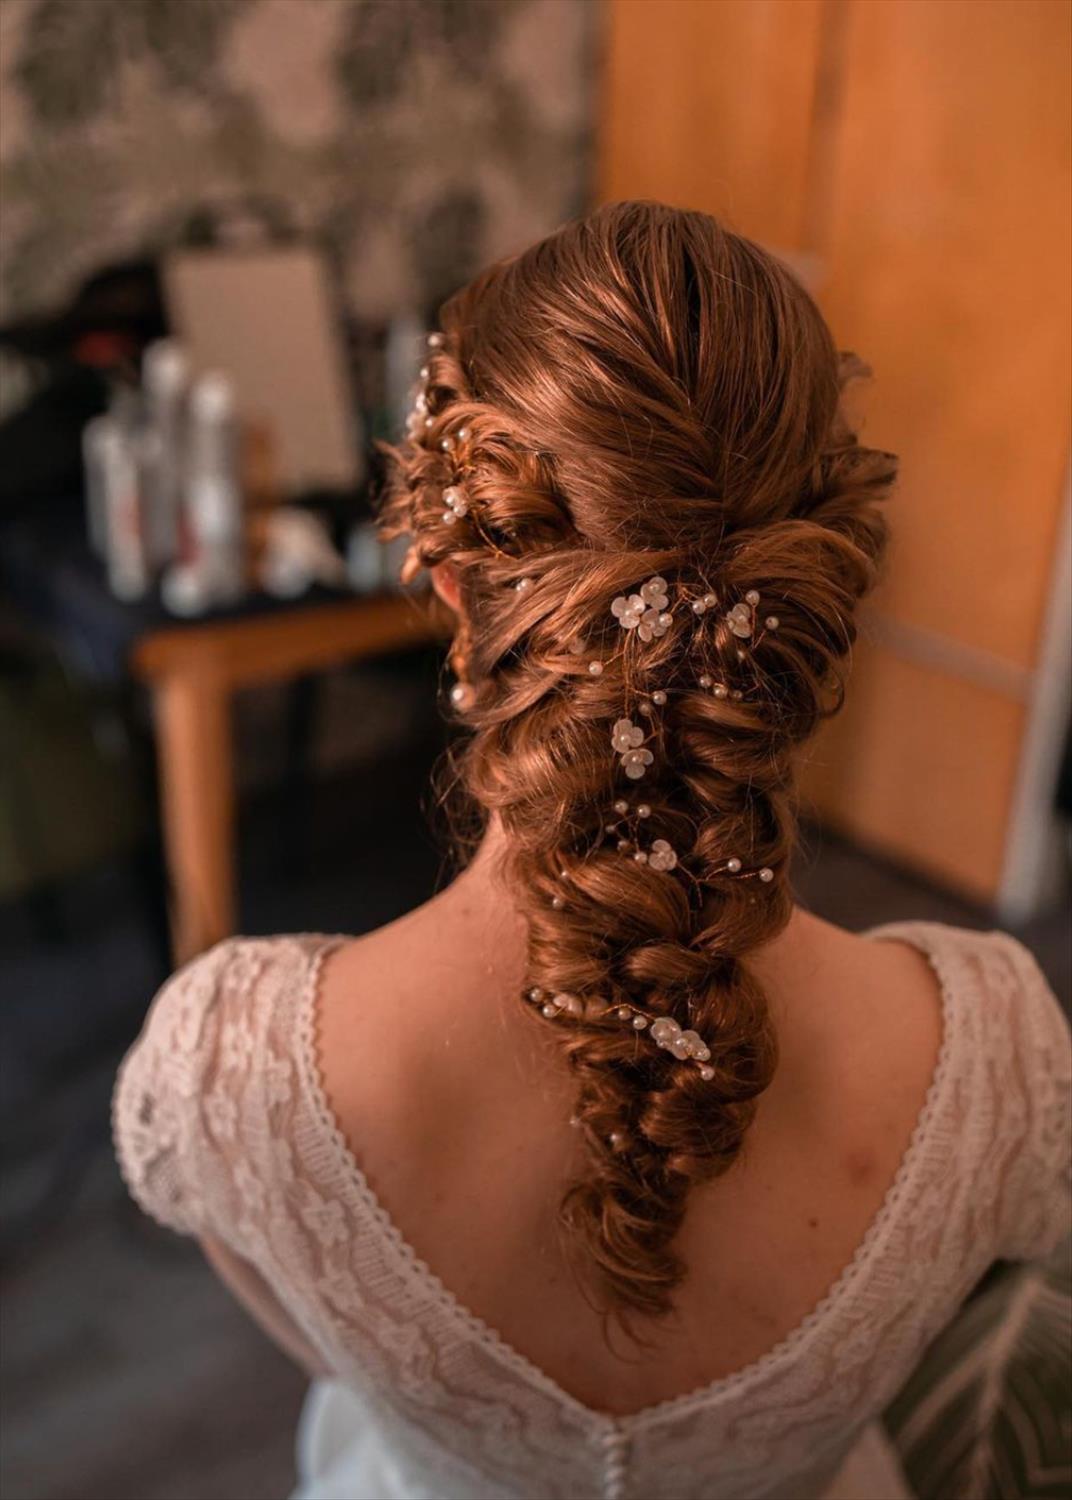 Wedding hairstyles for long hair perfect for brides